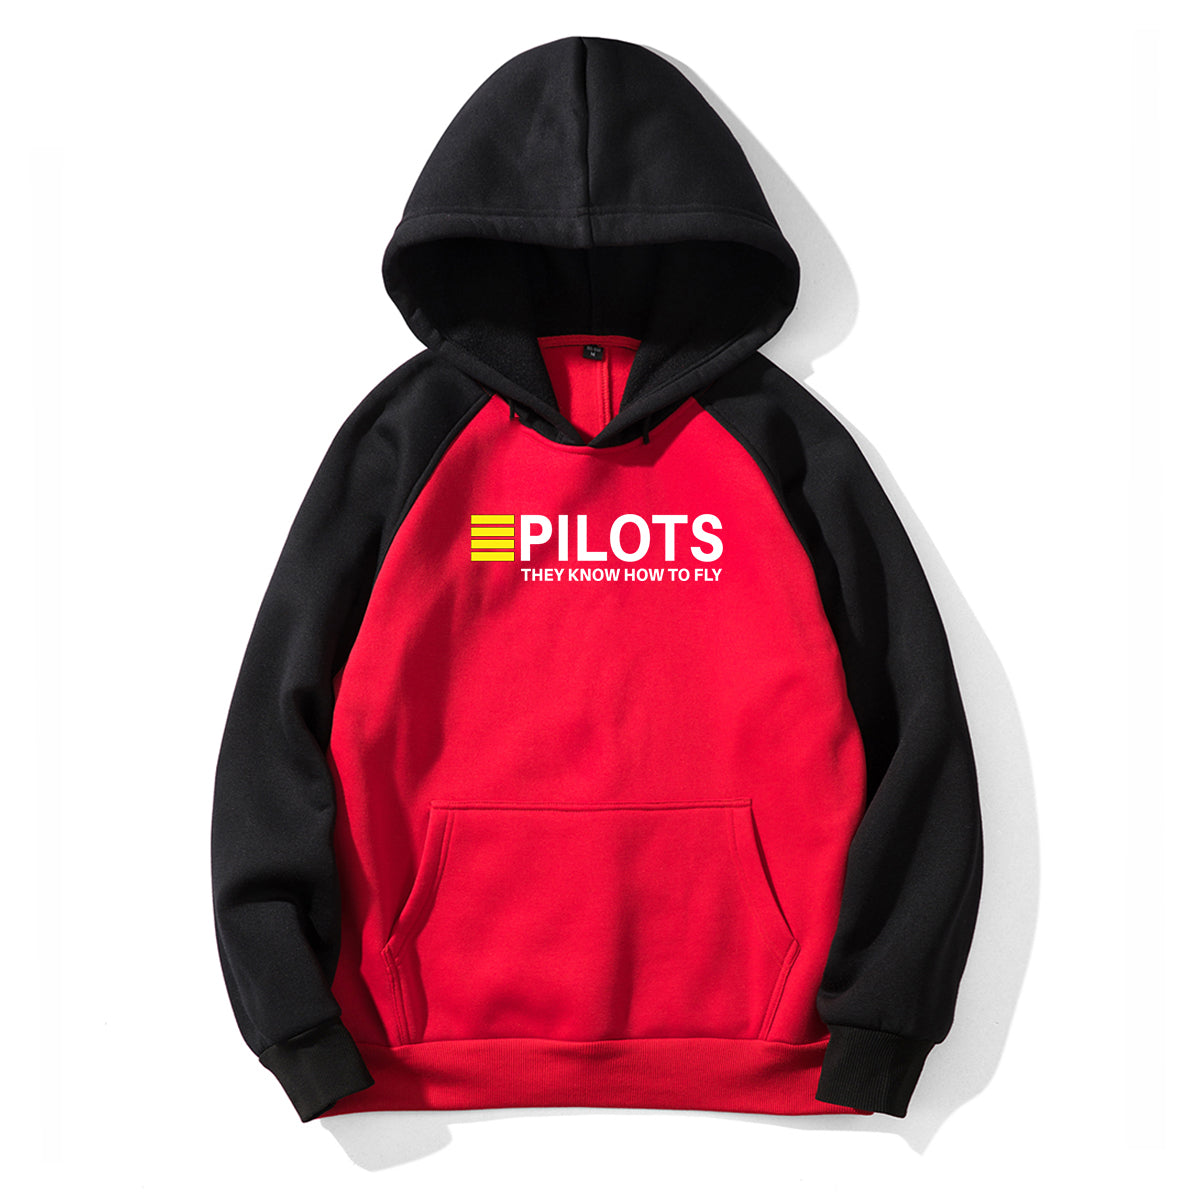 Pilots They Know How To Fly Designed Colourful Hoodies